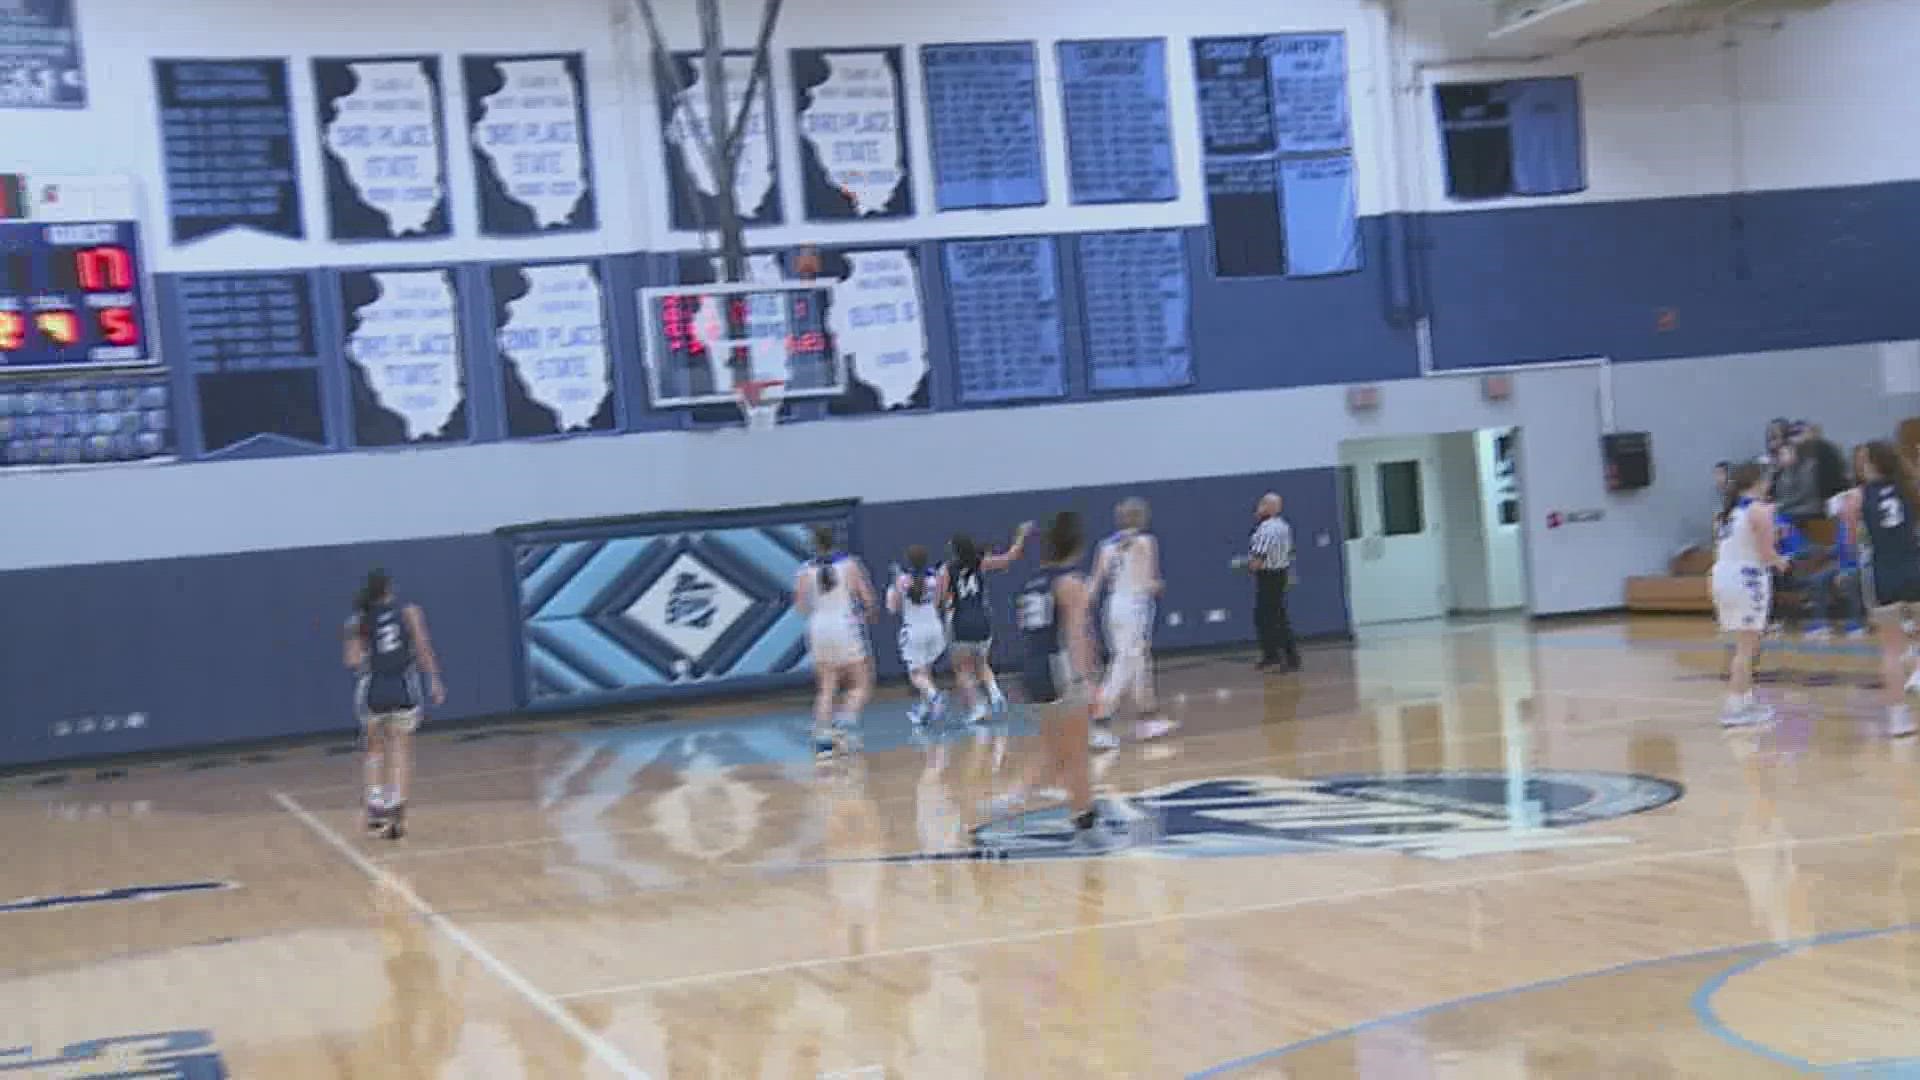 Check out this freaking awesome nearly-half-court shot!